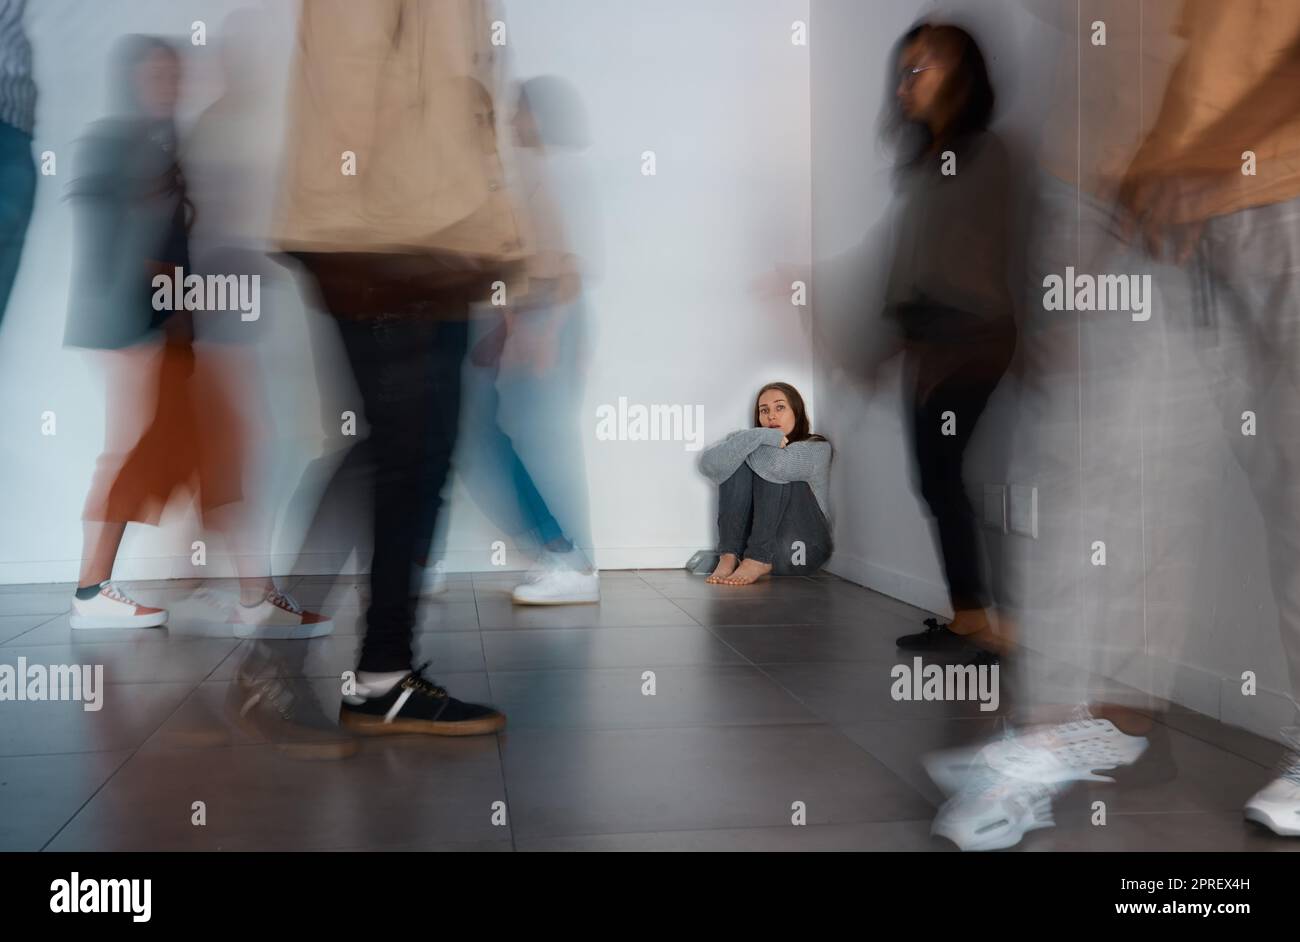 No one can hear you scream. a young woman sitting on the floor with people around her Stock Photo